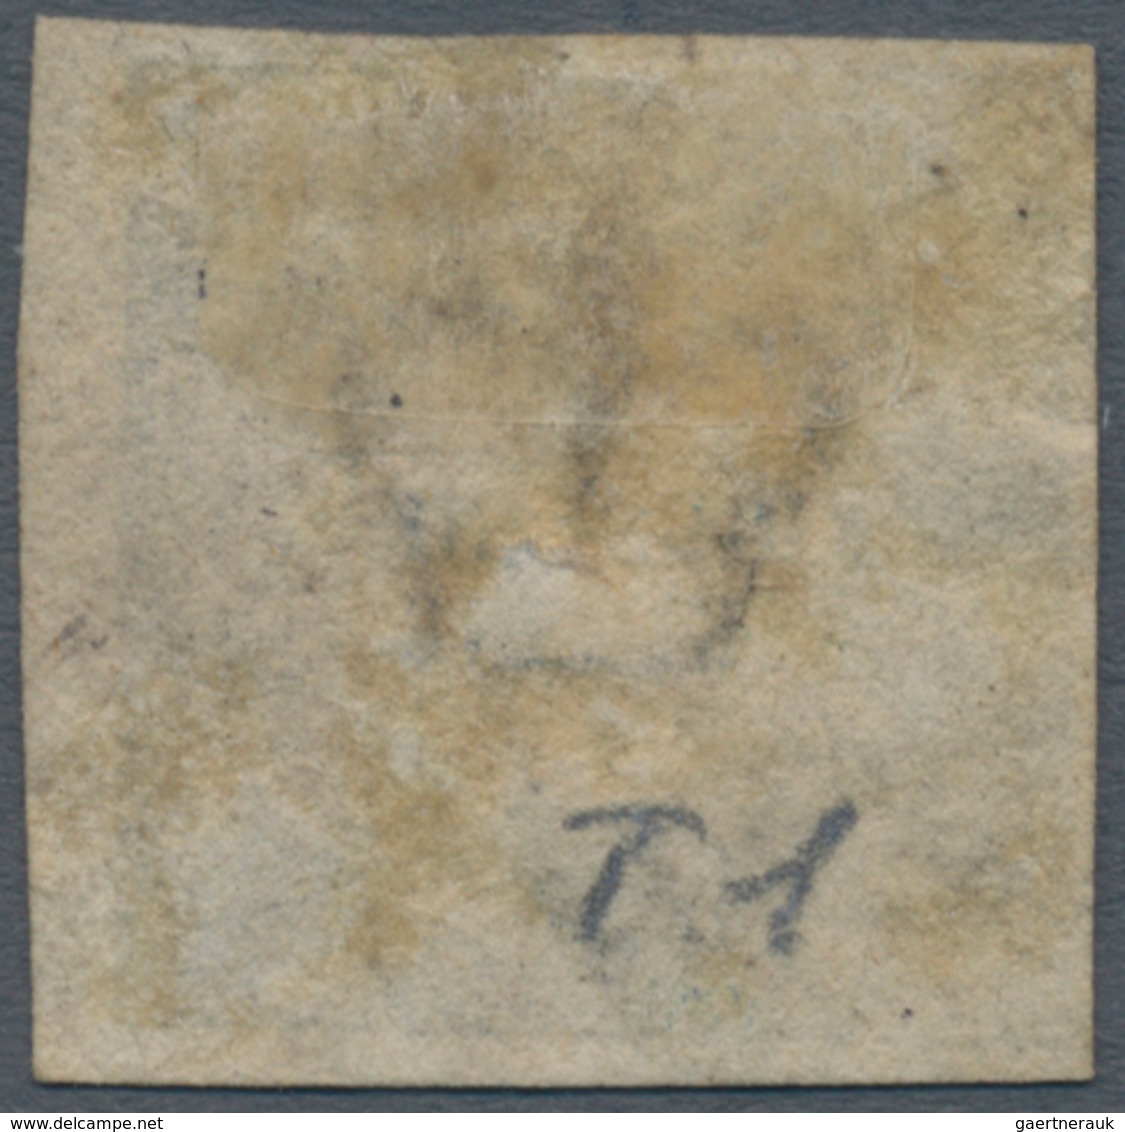 Dänemark: 1851-52 2 R.B.S. Blue, Thiele Printing, Plate II, No. 51, Type 1, Used And Cancelled By Nu - Gebraucht